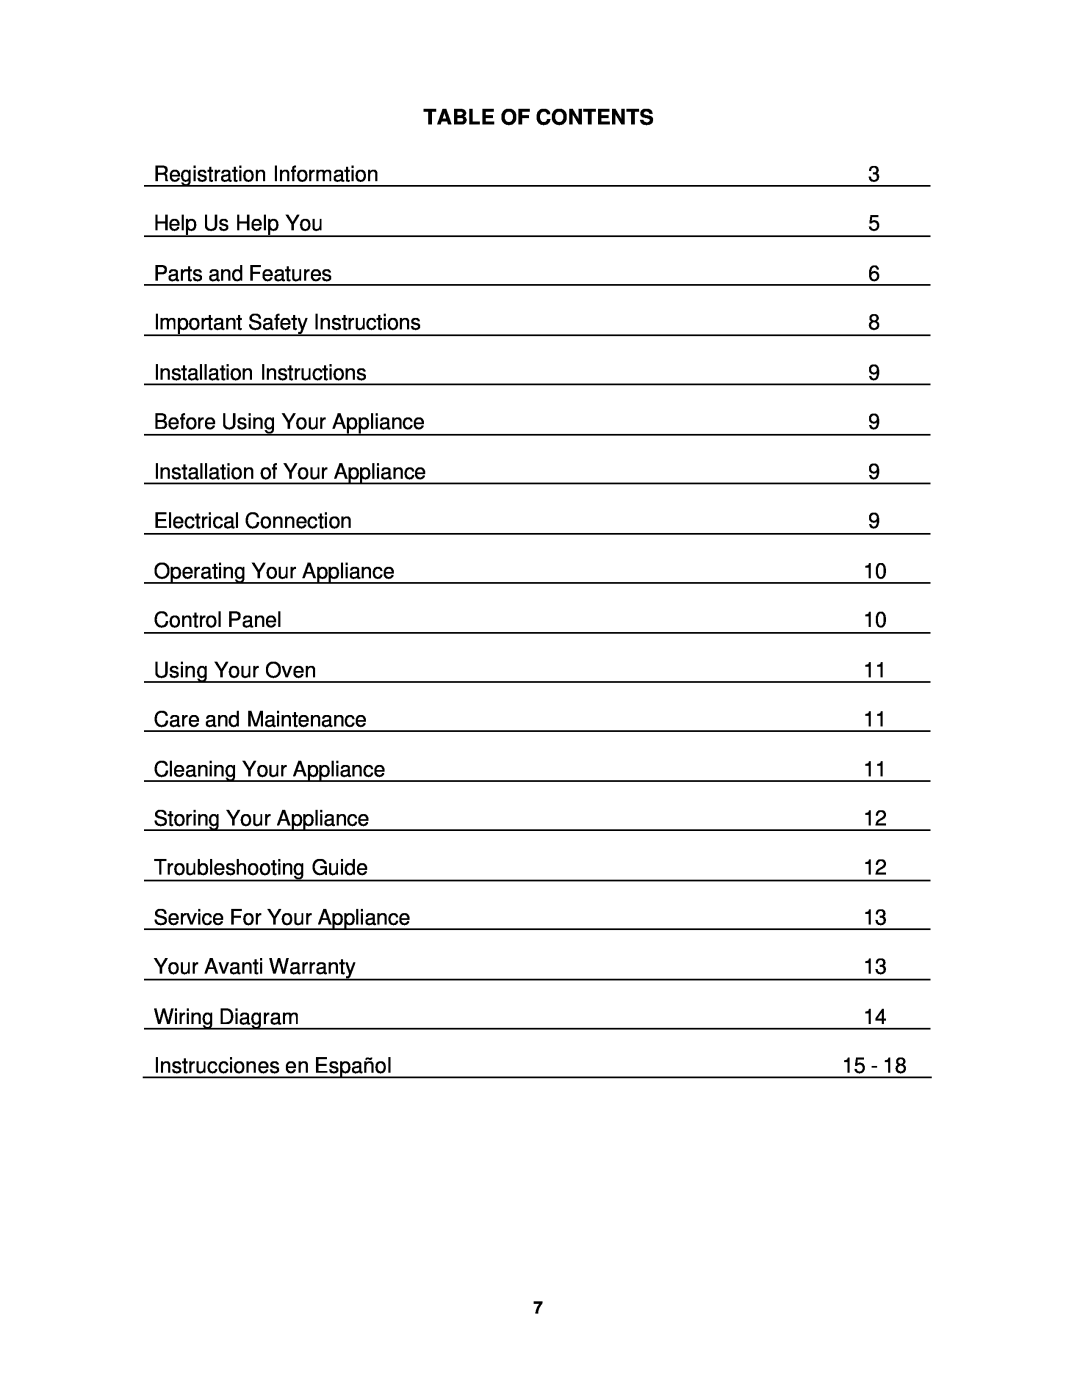 Avanti T-9 instruction manual Table Of Contents 